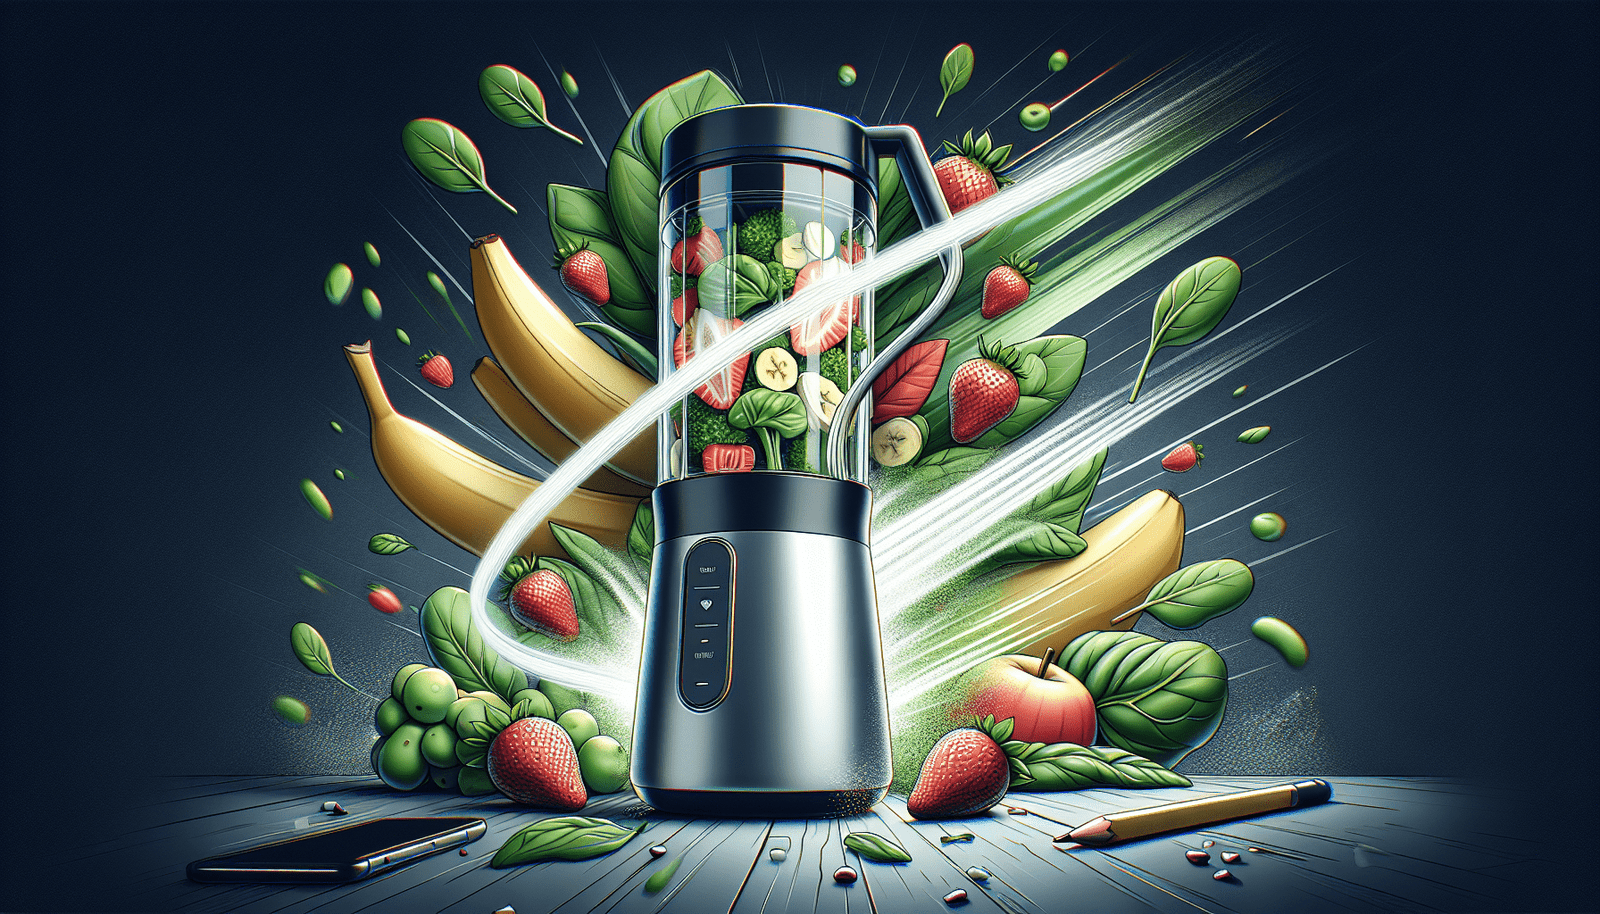 Battery Life Of Portable Blenders: What You Need To Know